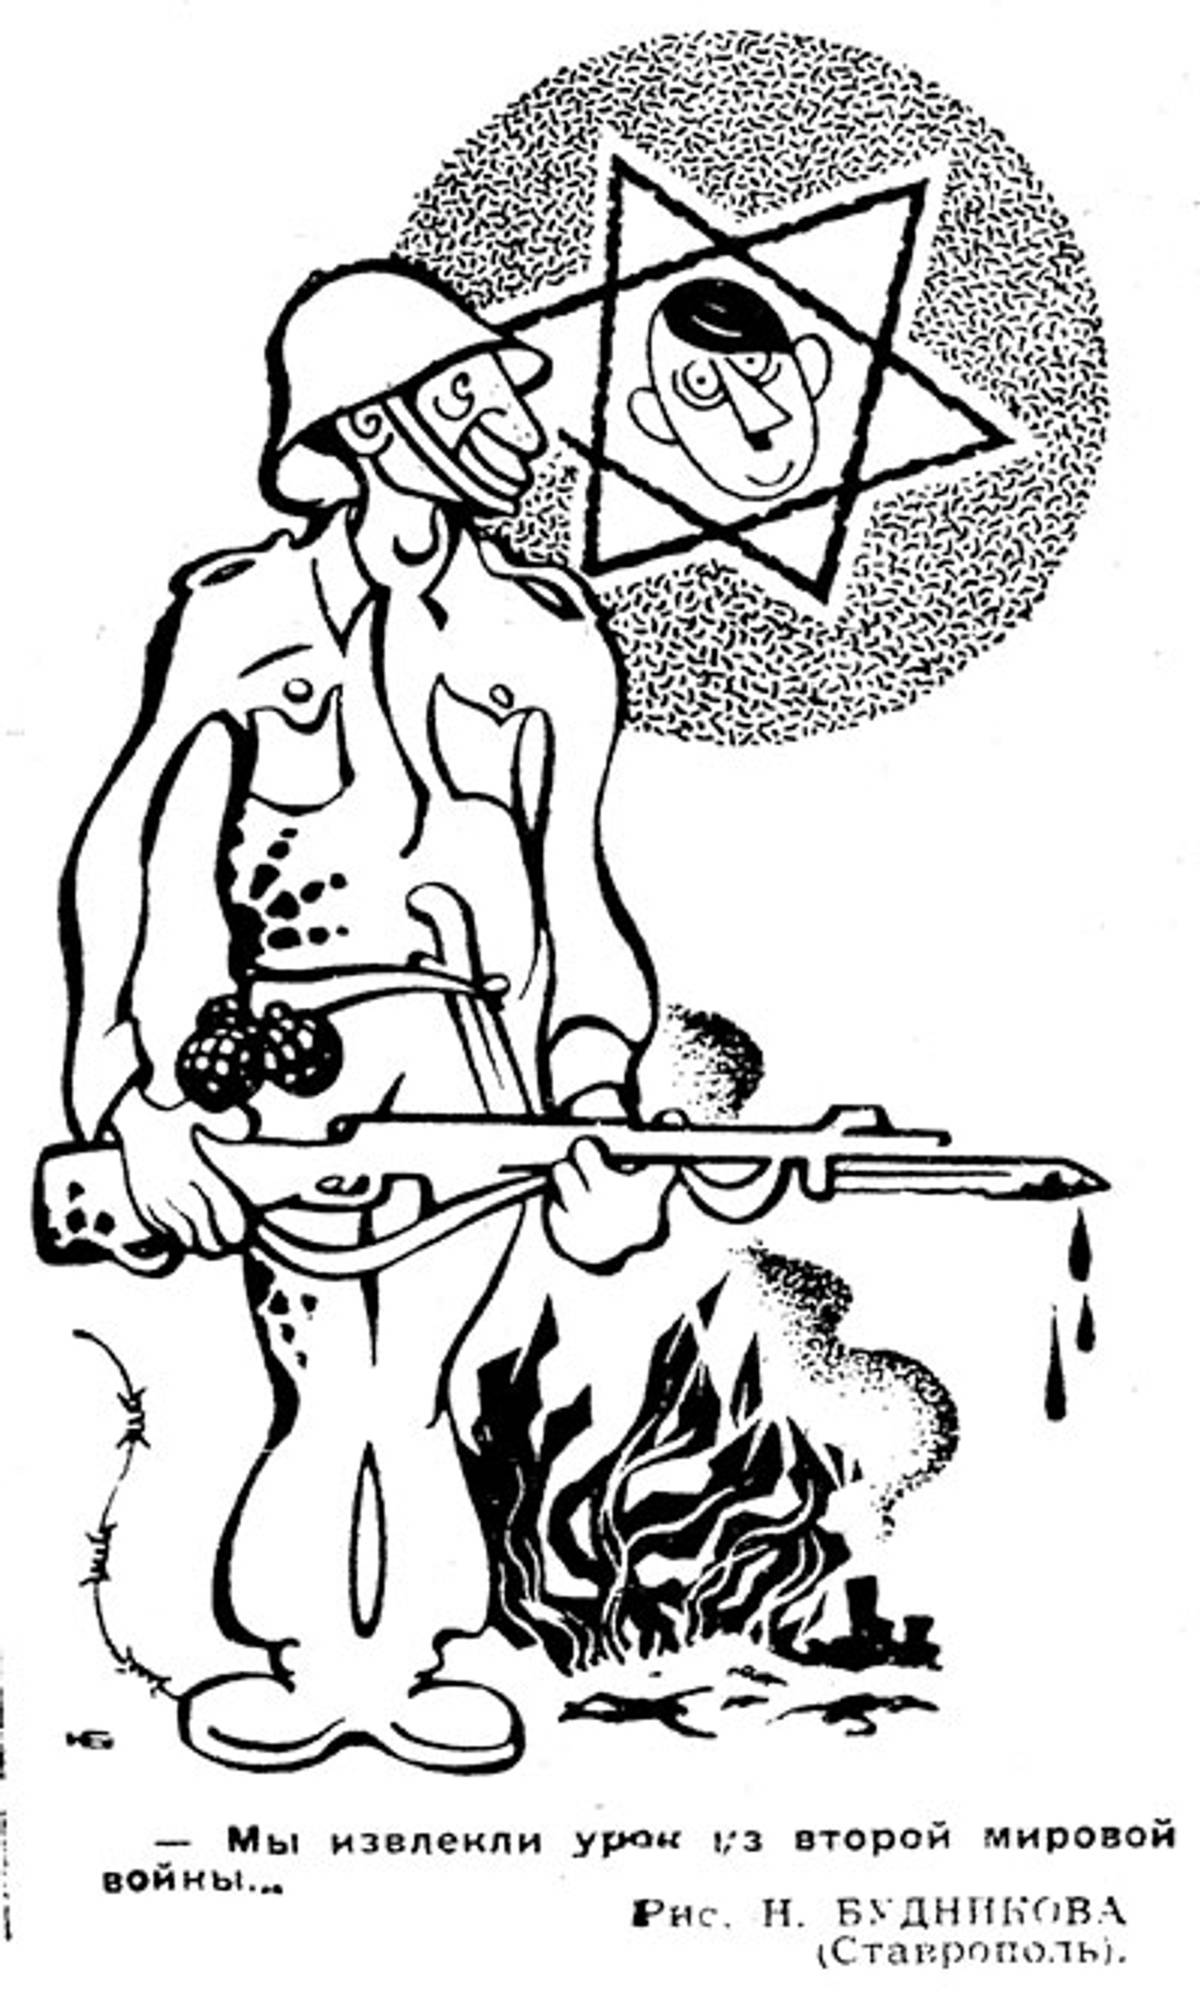 Fig. 14: ‘We learned a lesson from World War II …,’ N. Budnikov (Stavropol), Gudok, March 5, 1972. (From The Israeli-Arab Conflict in Soviet Caricatures, 1967–1973 by Yeshayahu Nir, Tcherikover Publishers, 1976)